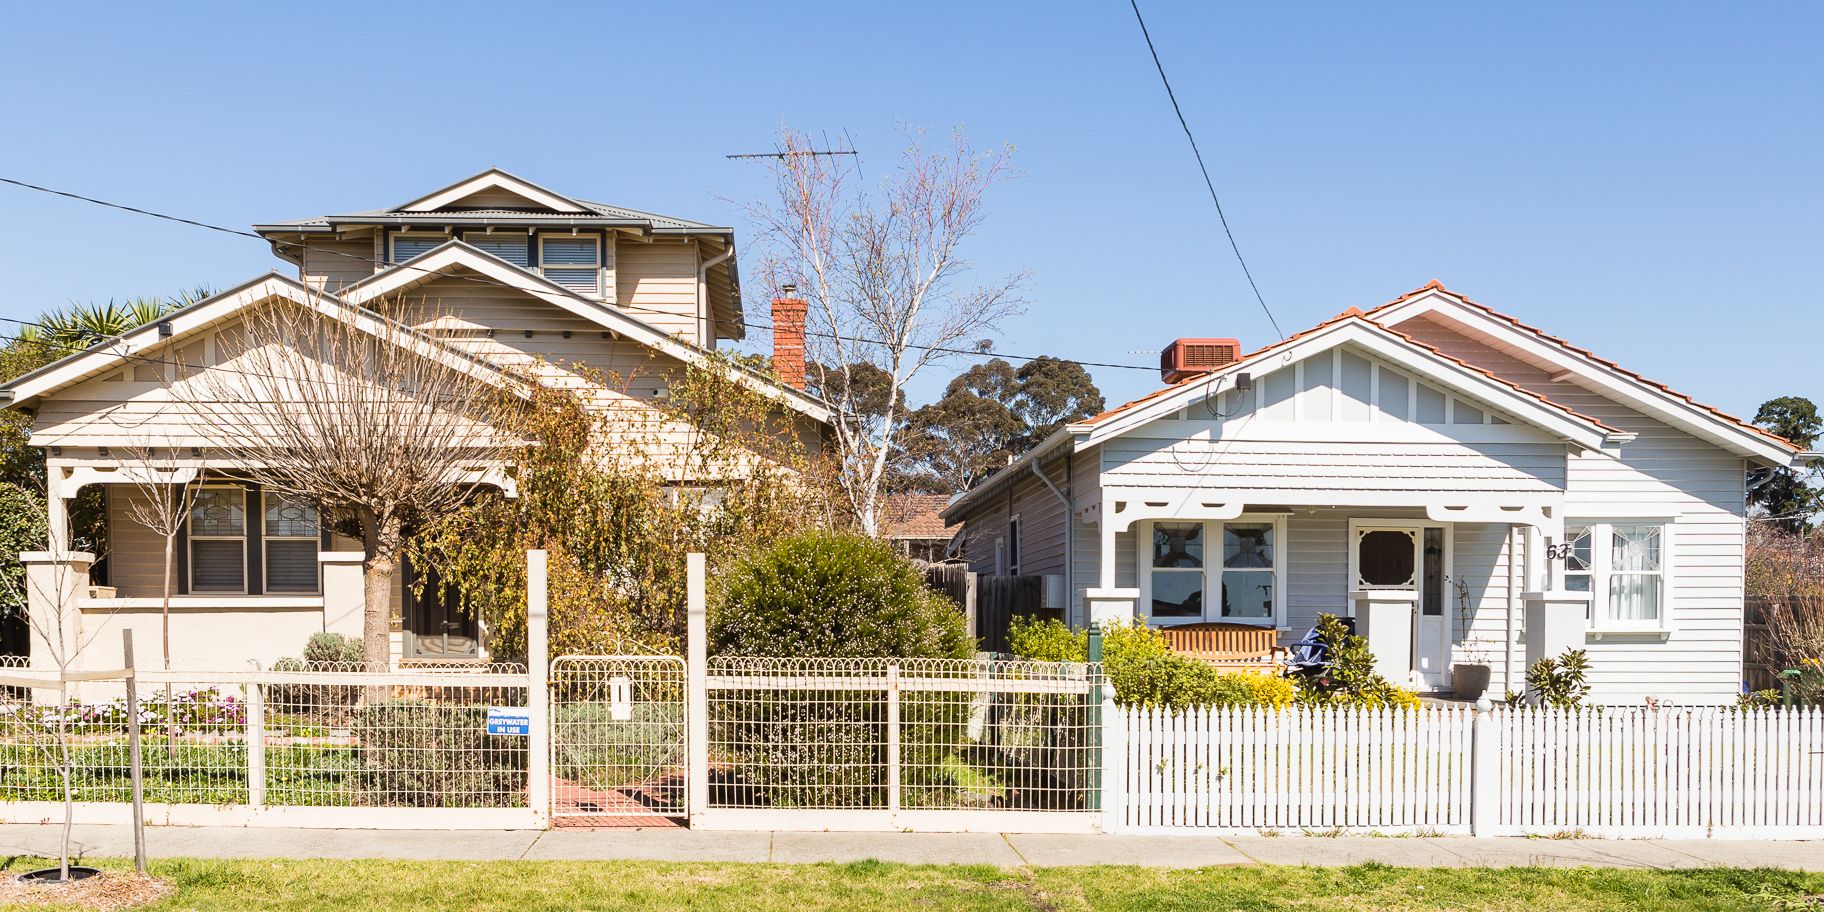 How increasingly cautious Melbourne home buyers are playing it safe